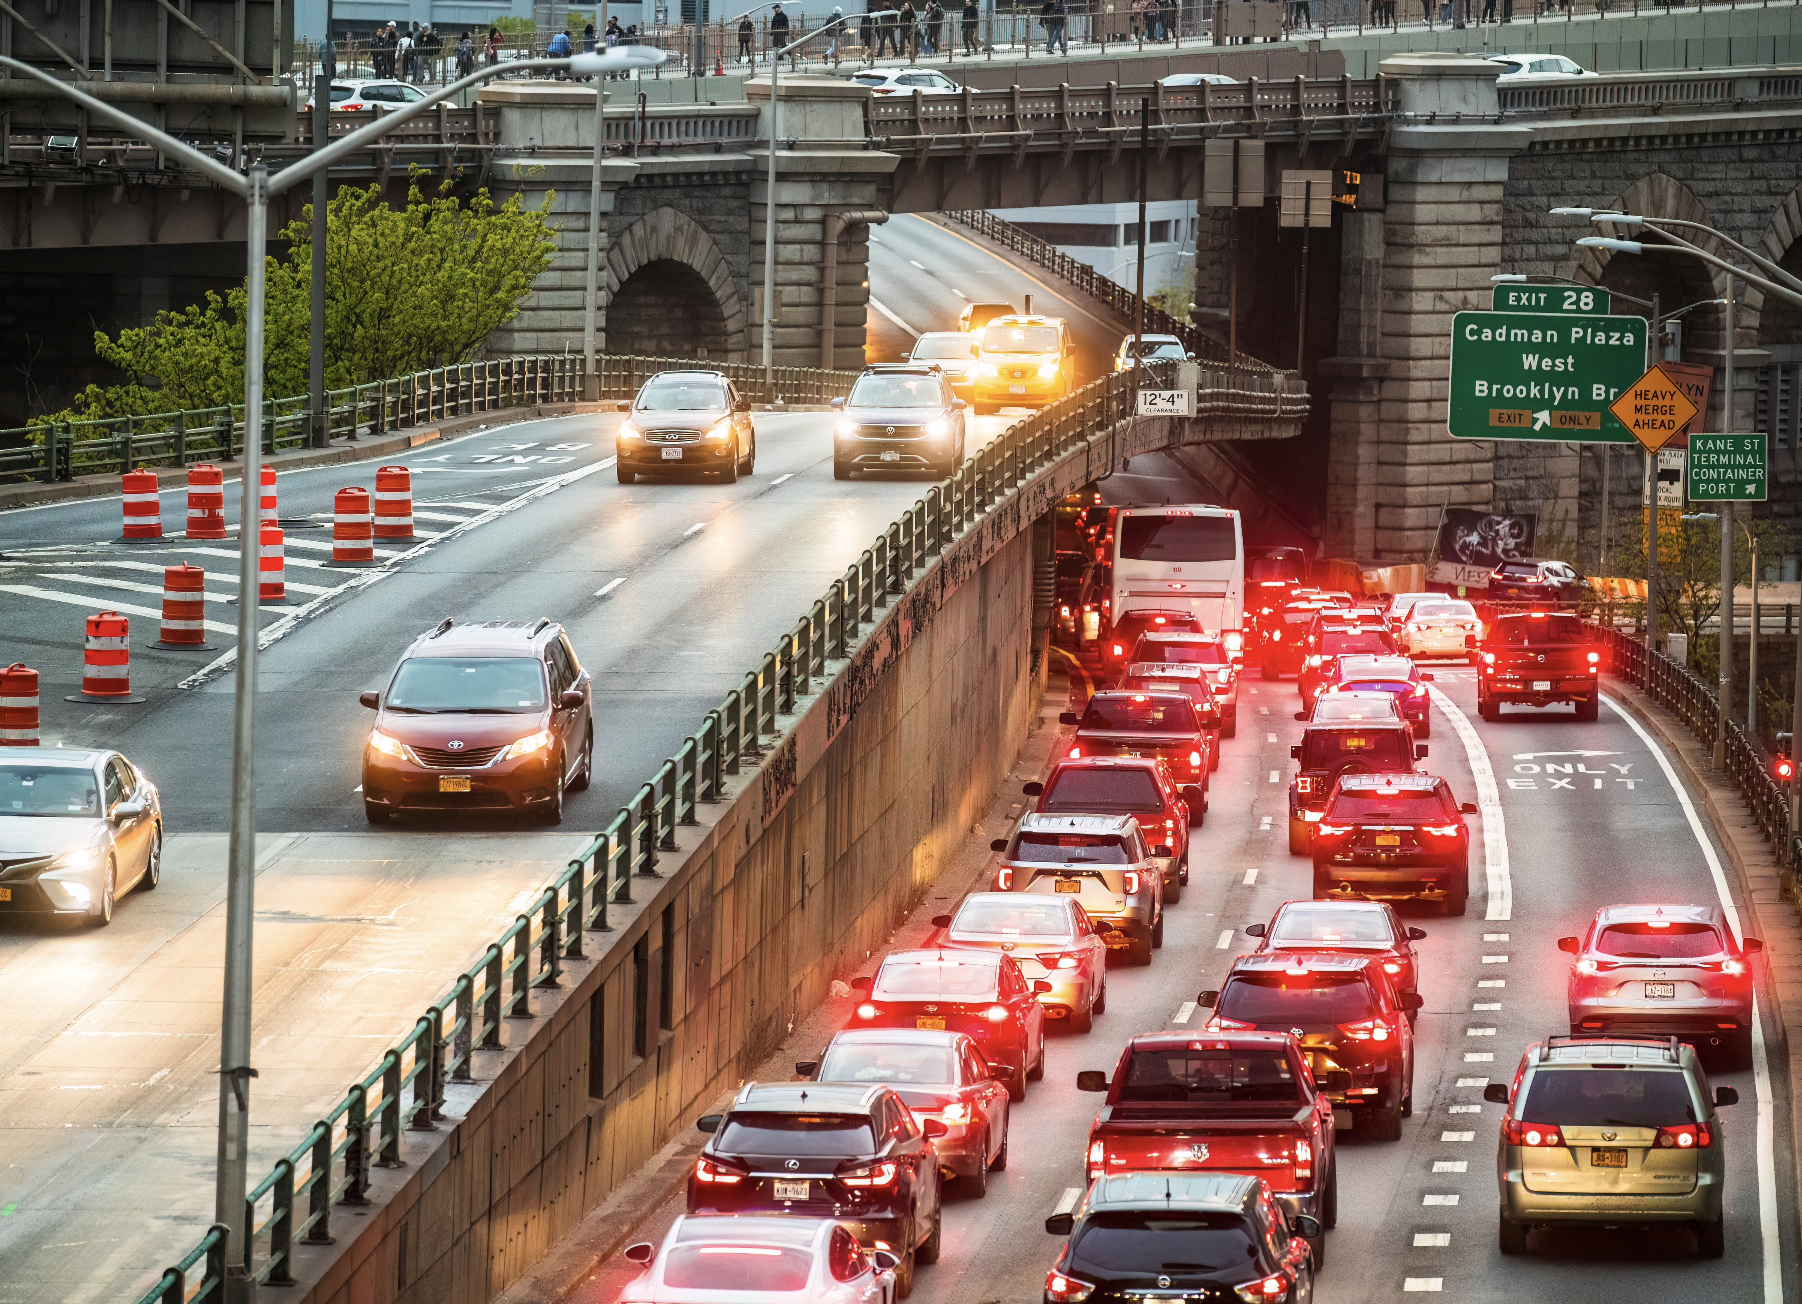 The BQE in Brooklyn is closing for repairs this weekend